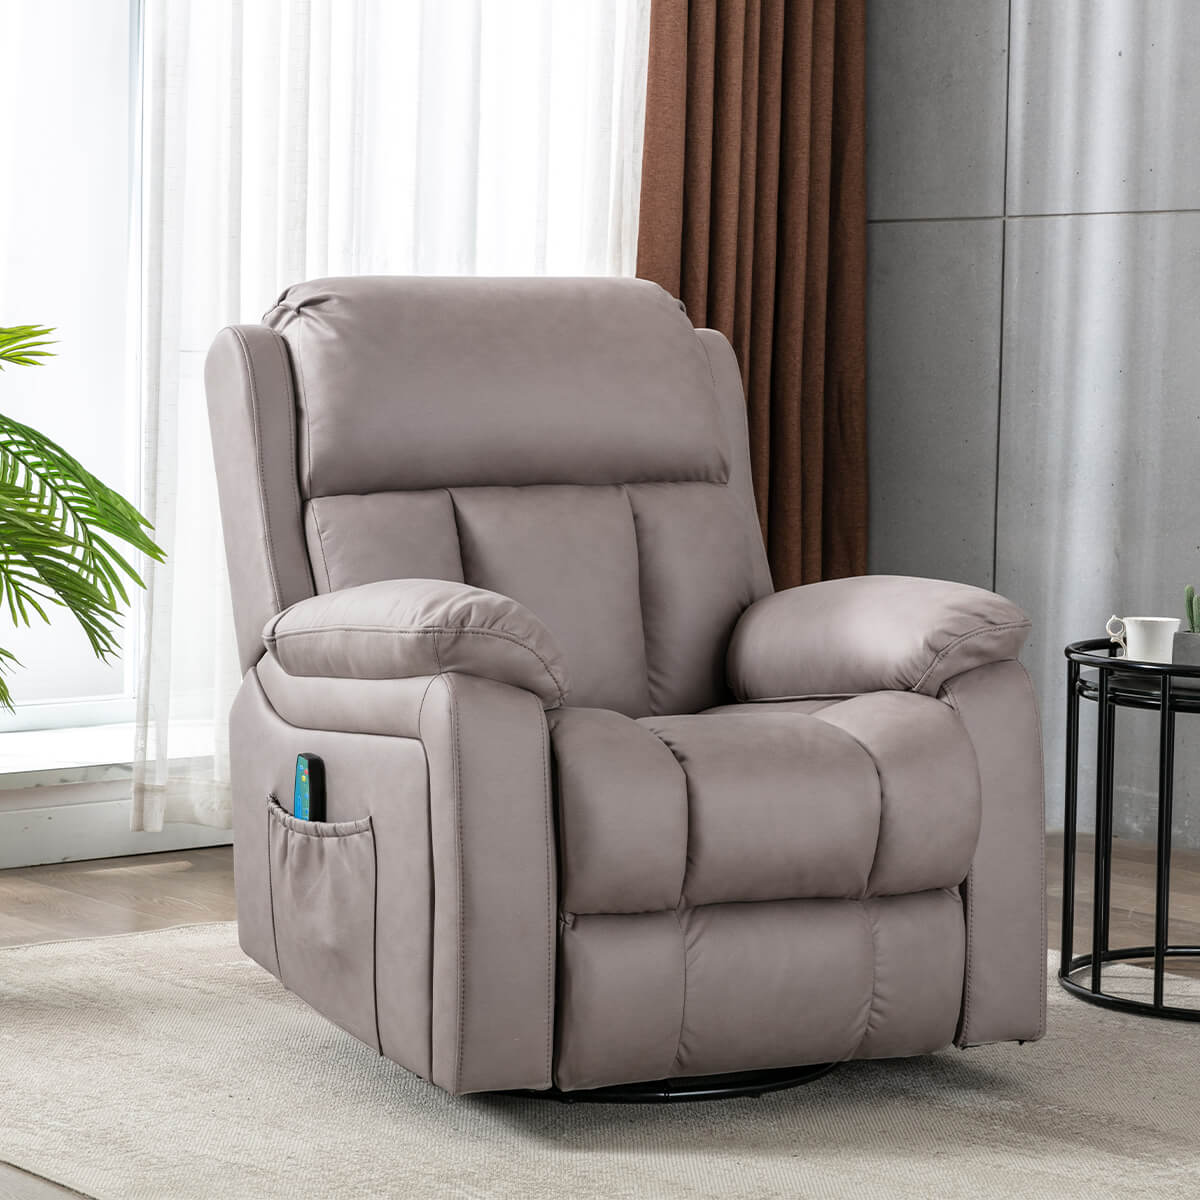 Massage Recliner Chair w/ Heating, 360¡ã Swivel Recliner Lounge Chair, Leather Reclining Sofa w/ Side Pockets, Chocolate